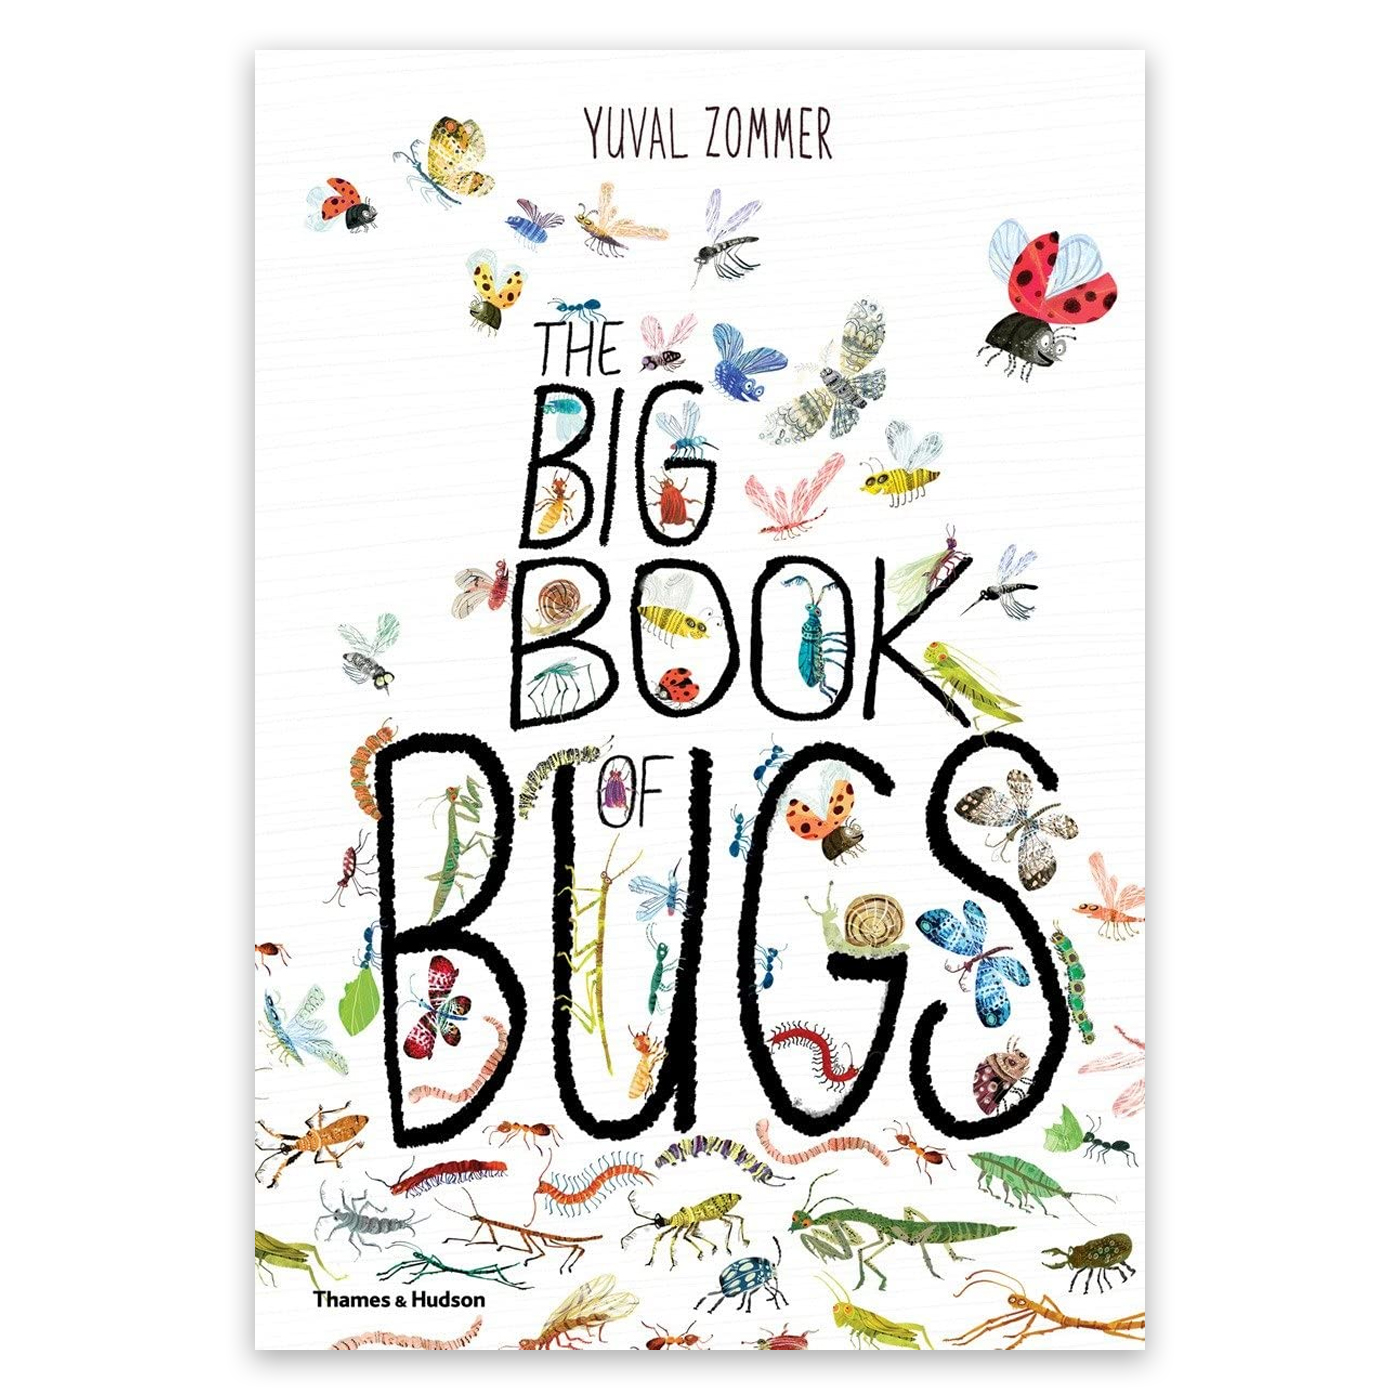  The Big Book of Bugs